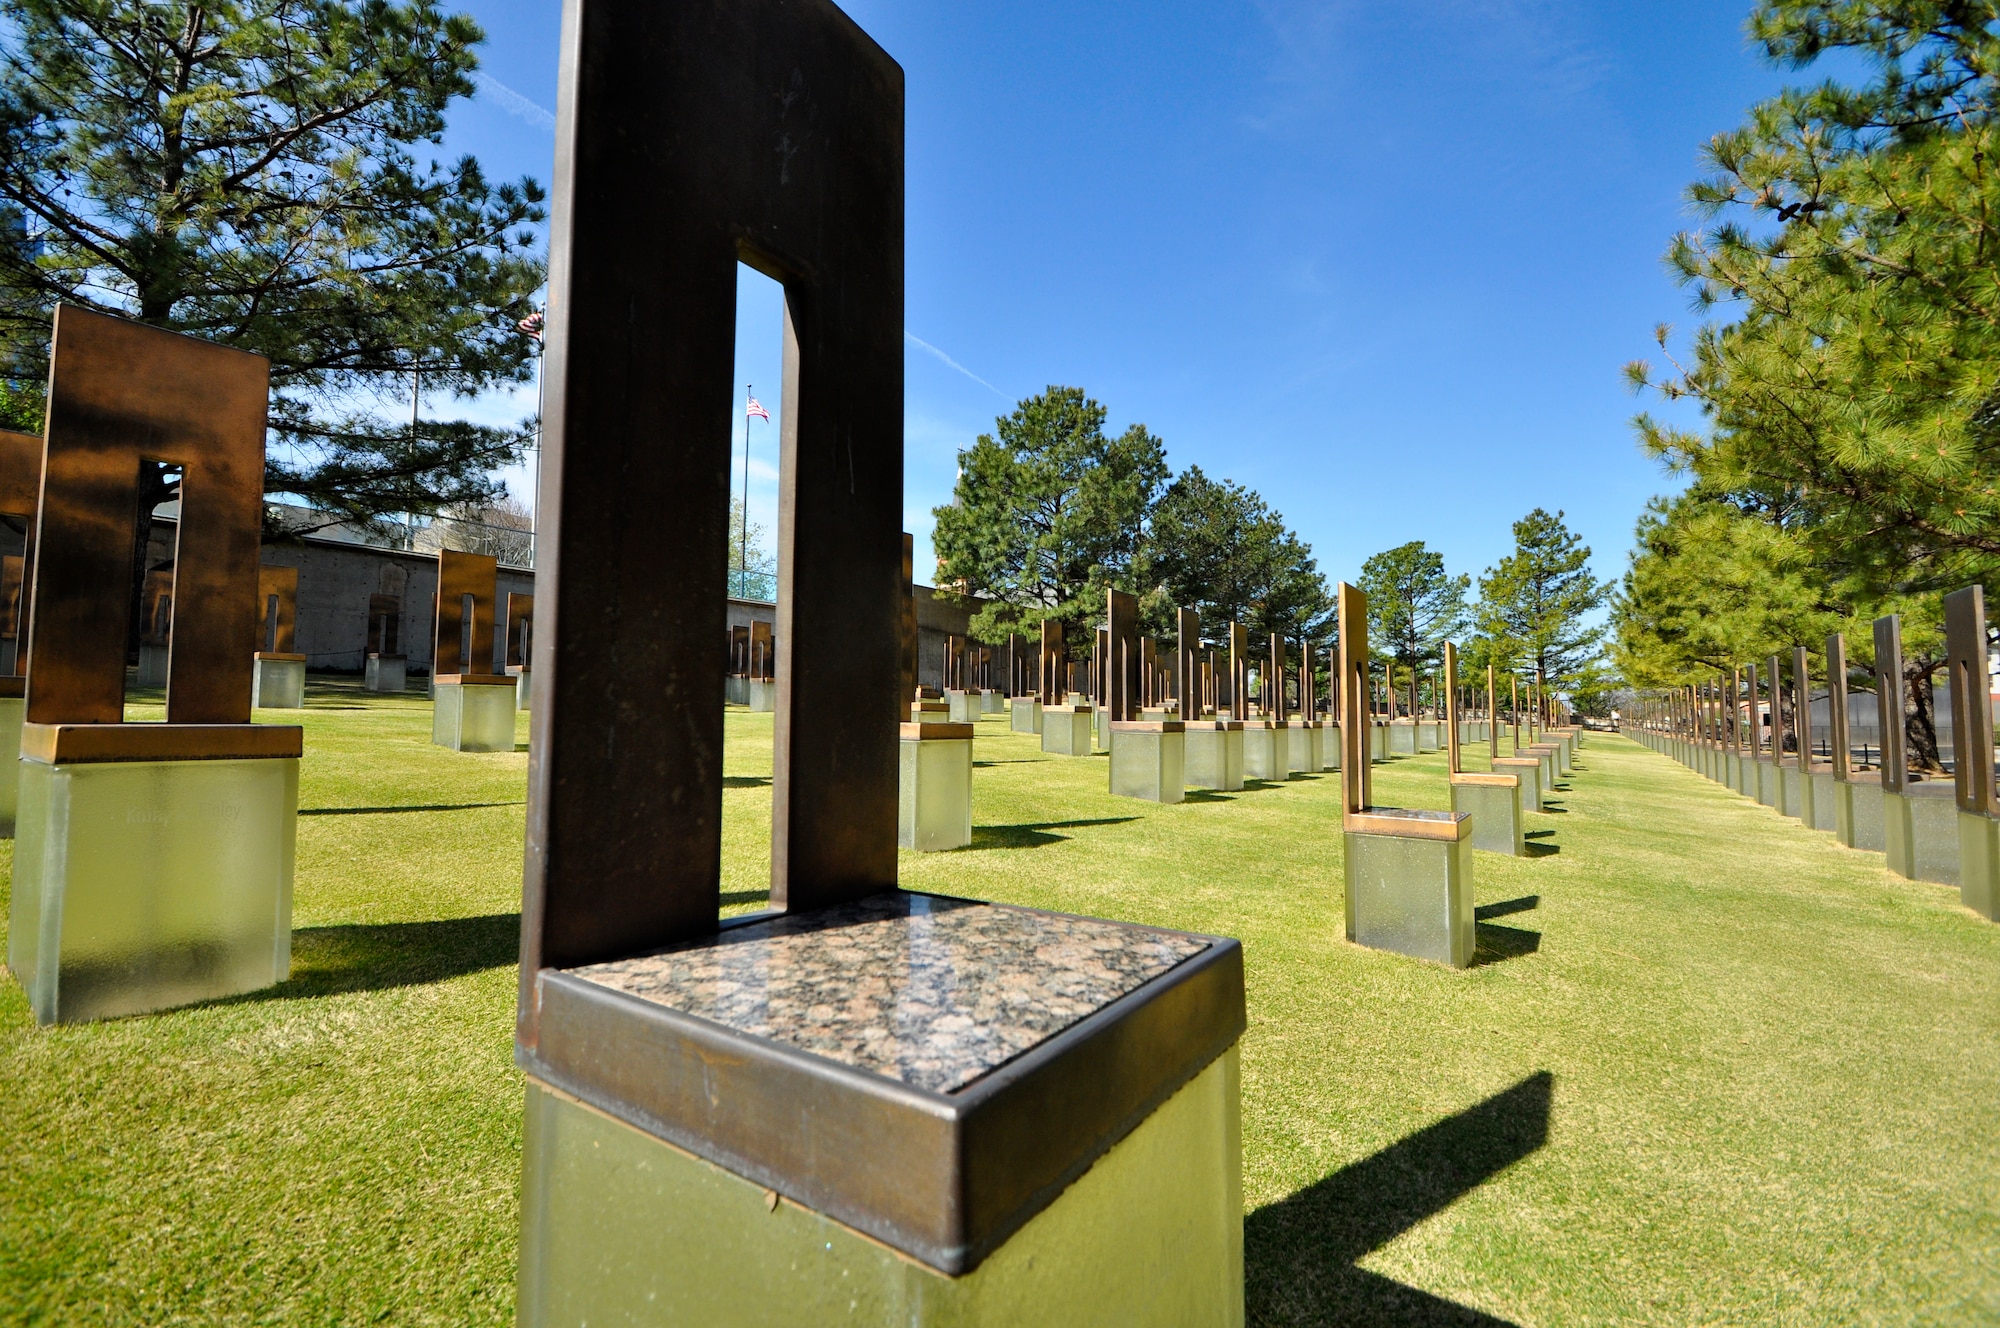 Nineteen years after the bombing of the Alfred P. Murrah Federal Building, The Field of Empty Chairs sits on what was once the footprint of the building.  The 168 empty chairs represent the lives taken on the morning of April 19, 1995.  They stand in nine rows, representing each floor of the building with the name of someone killed on that floor.  Nineteen smaller chairs stand to represent the children who perished that morning.  (U.S. Air Force photo/Senior Airman Mark Hybers)